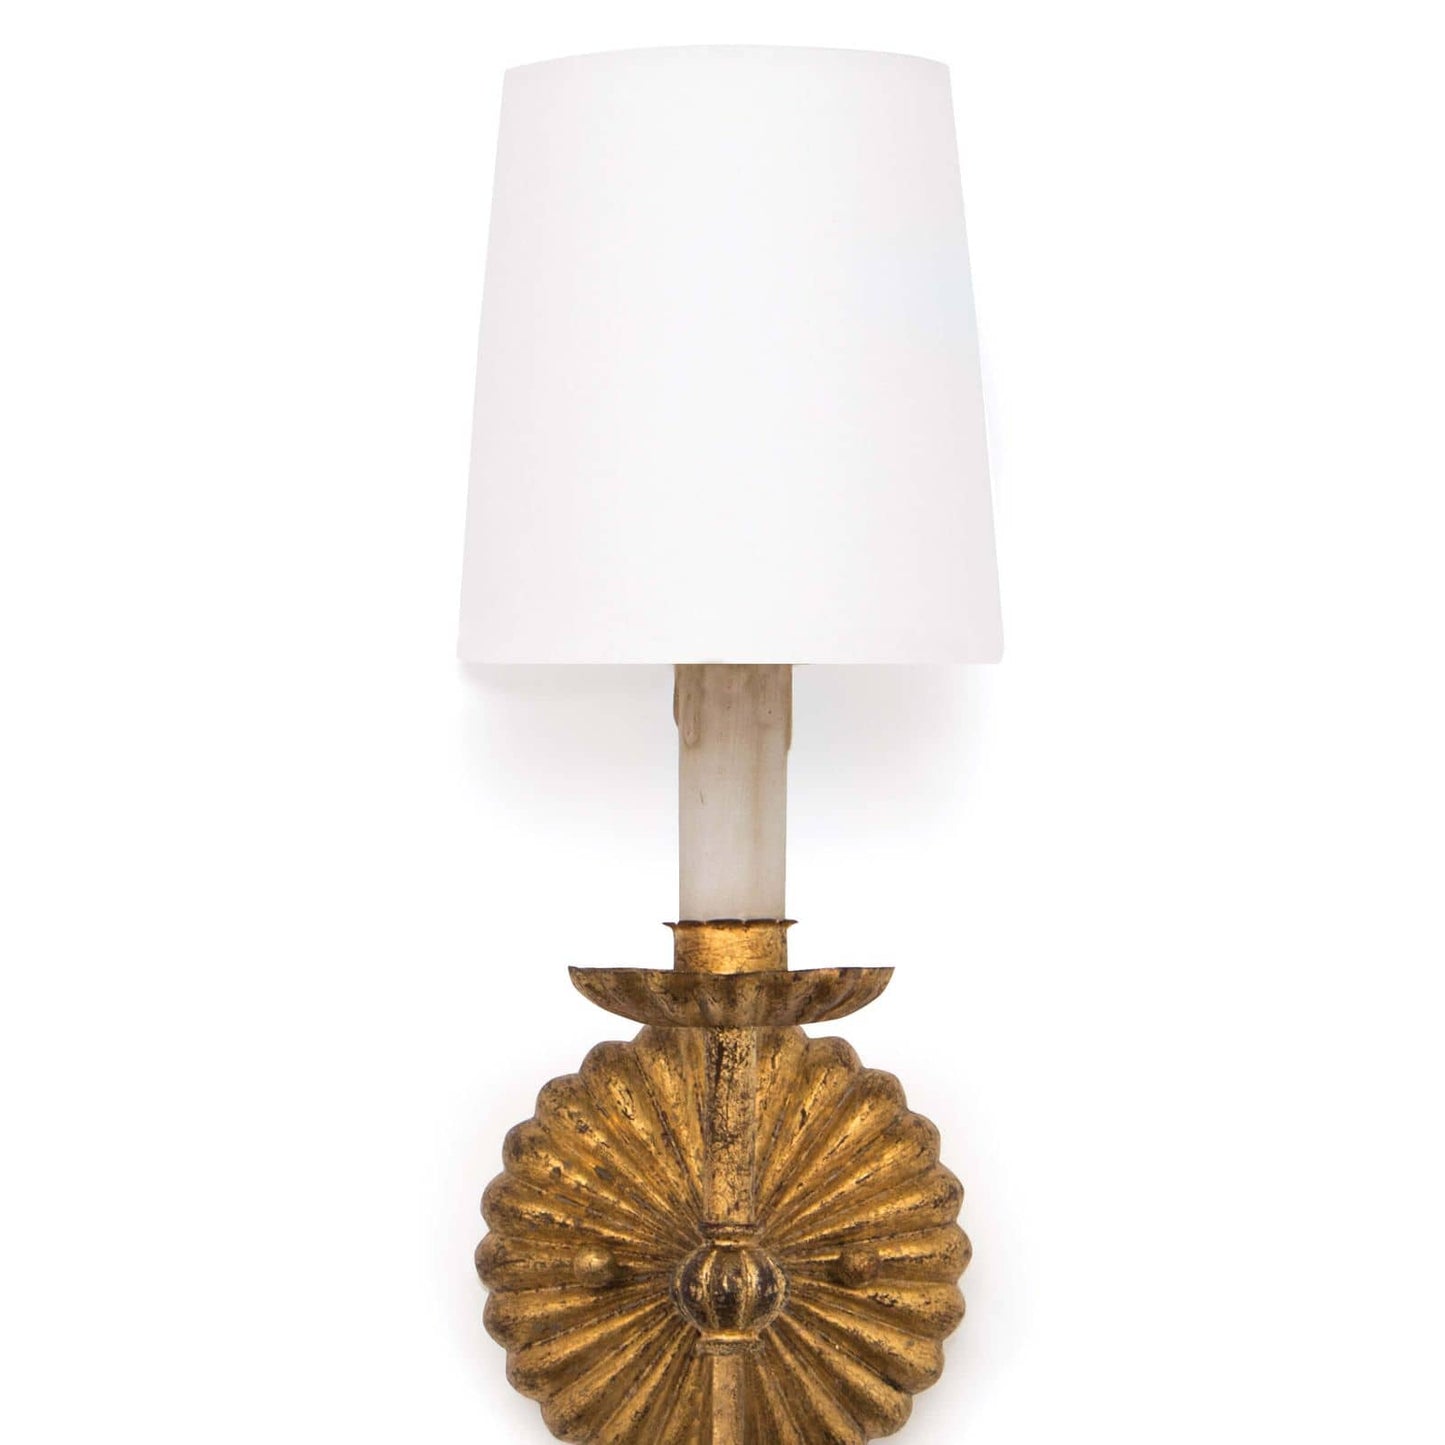 Clove Sconce Single in Antique Gold Leaf by Regina Andrew